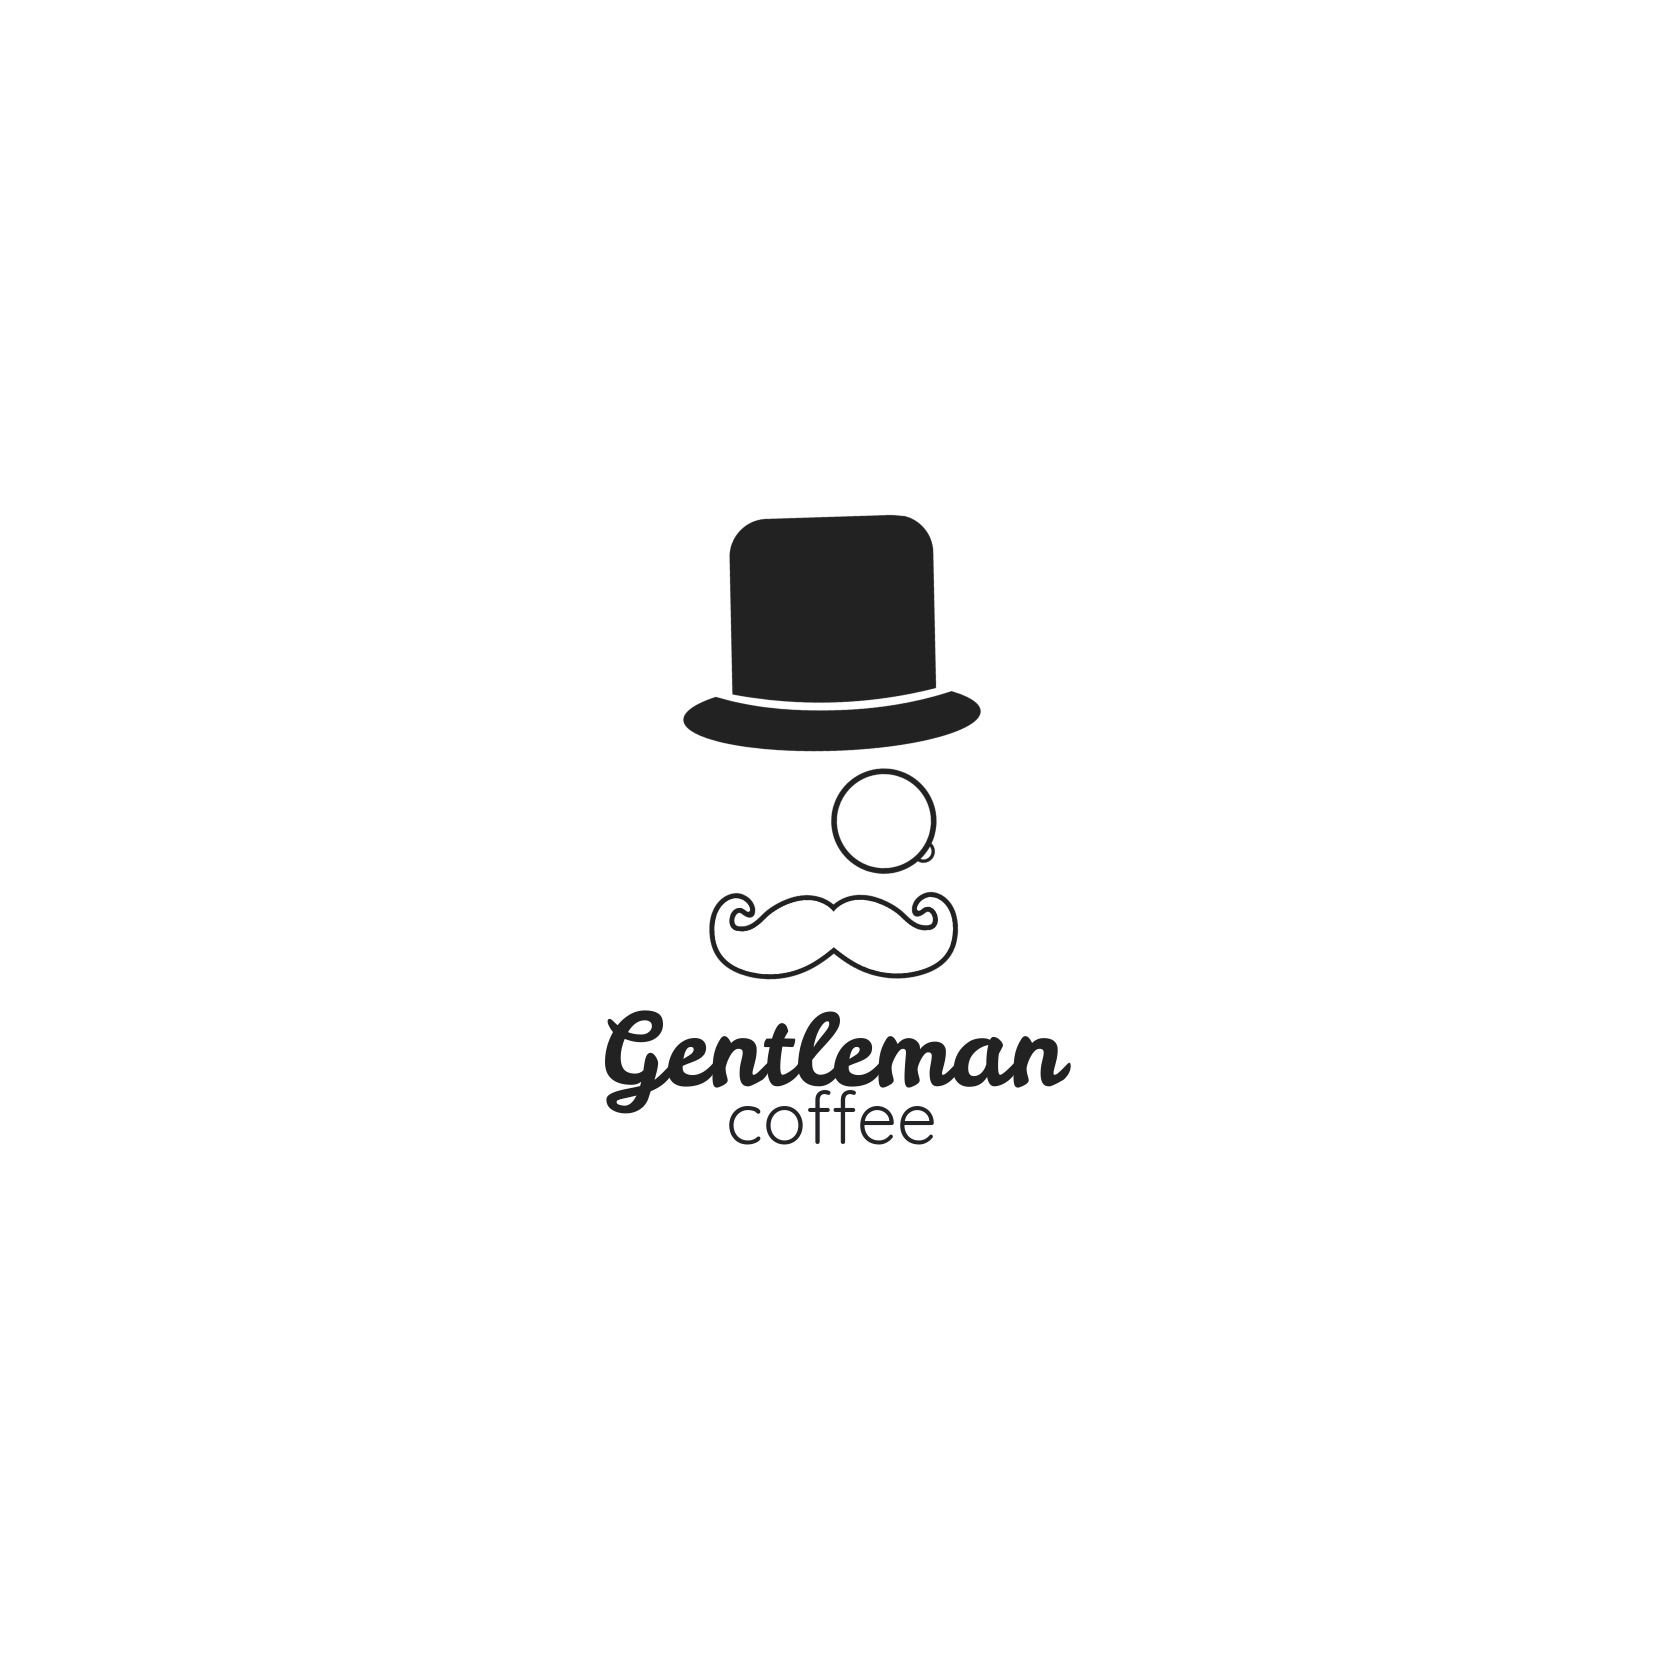 Gentleman coffee shed logo with a contour drawing of a monocle, cylinder, and moustache - Leckerli One is an appropriate font that will give your logo a more carefree and playful look - Image